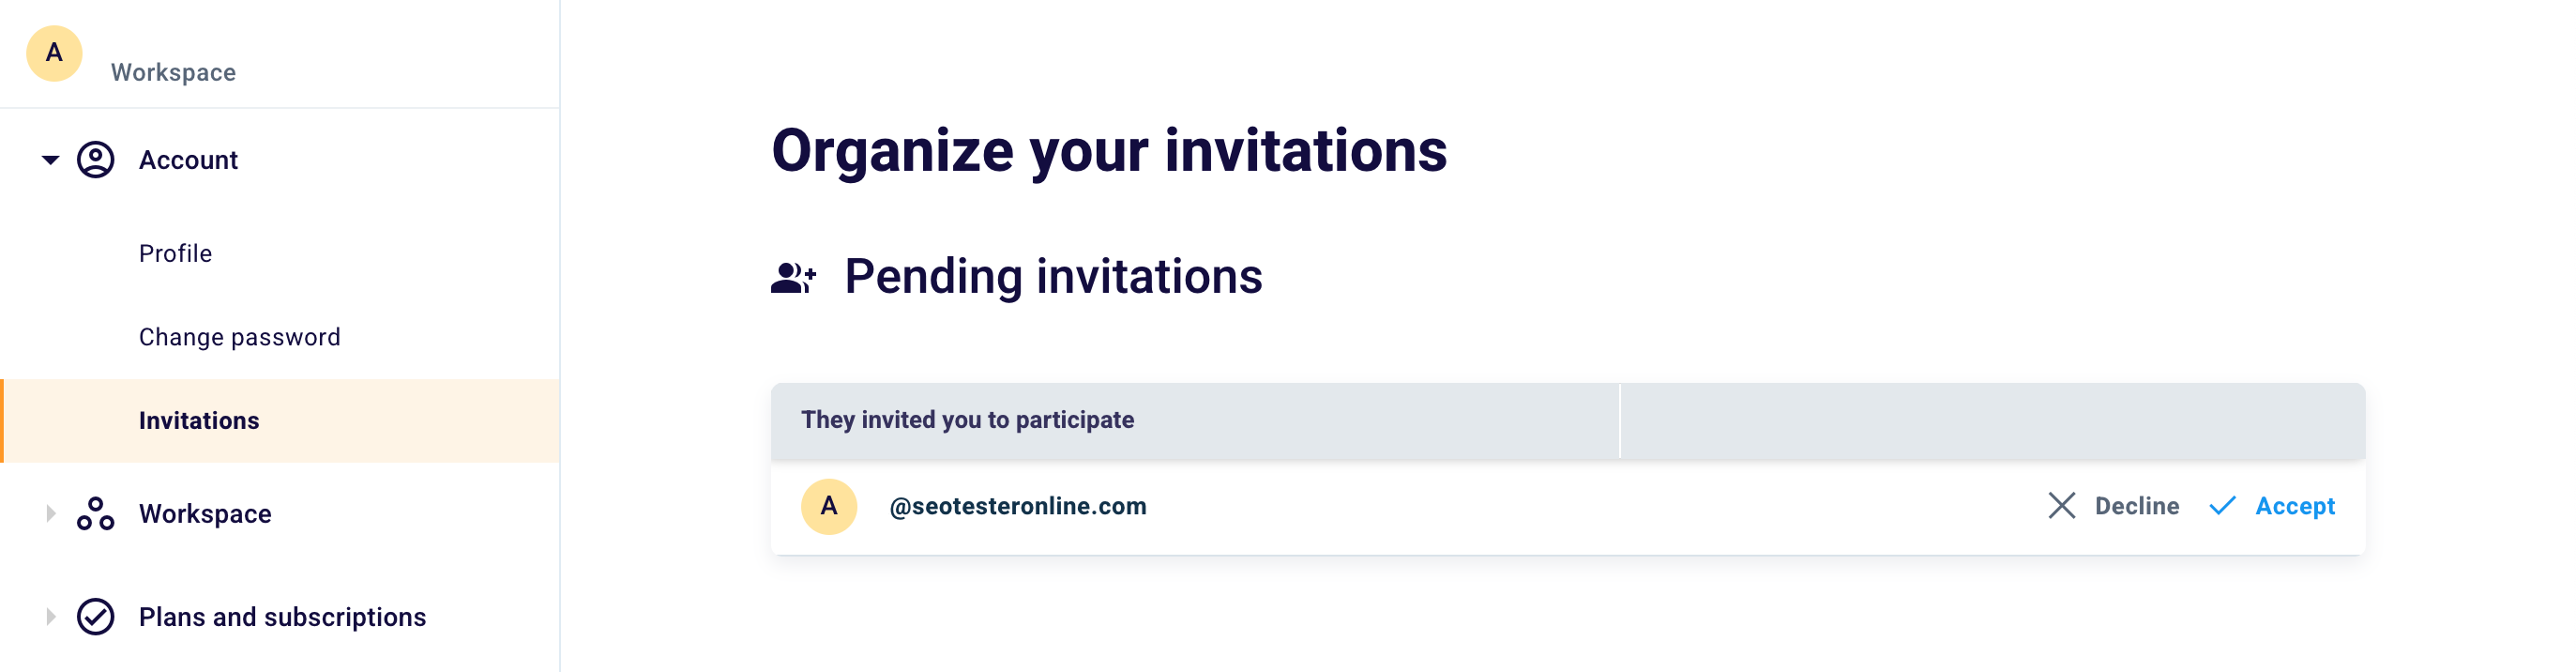 Workspace Invitations Page